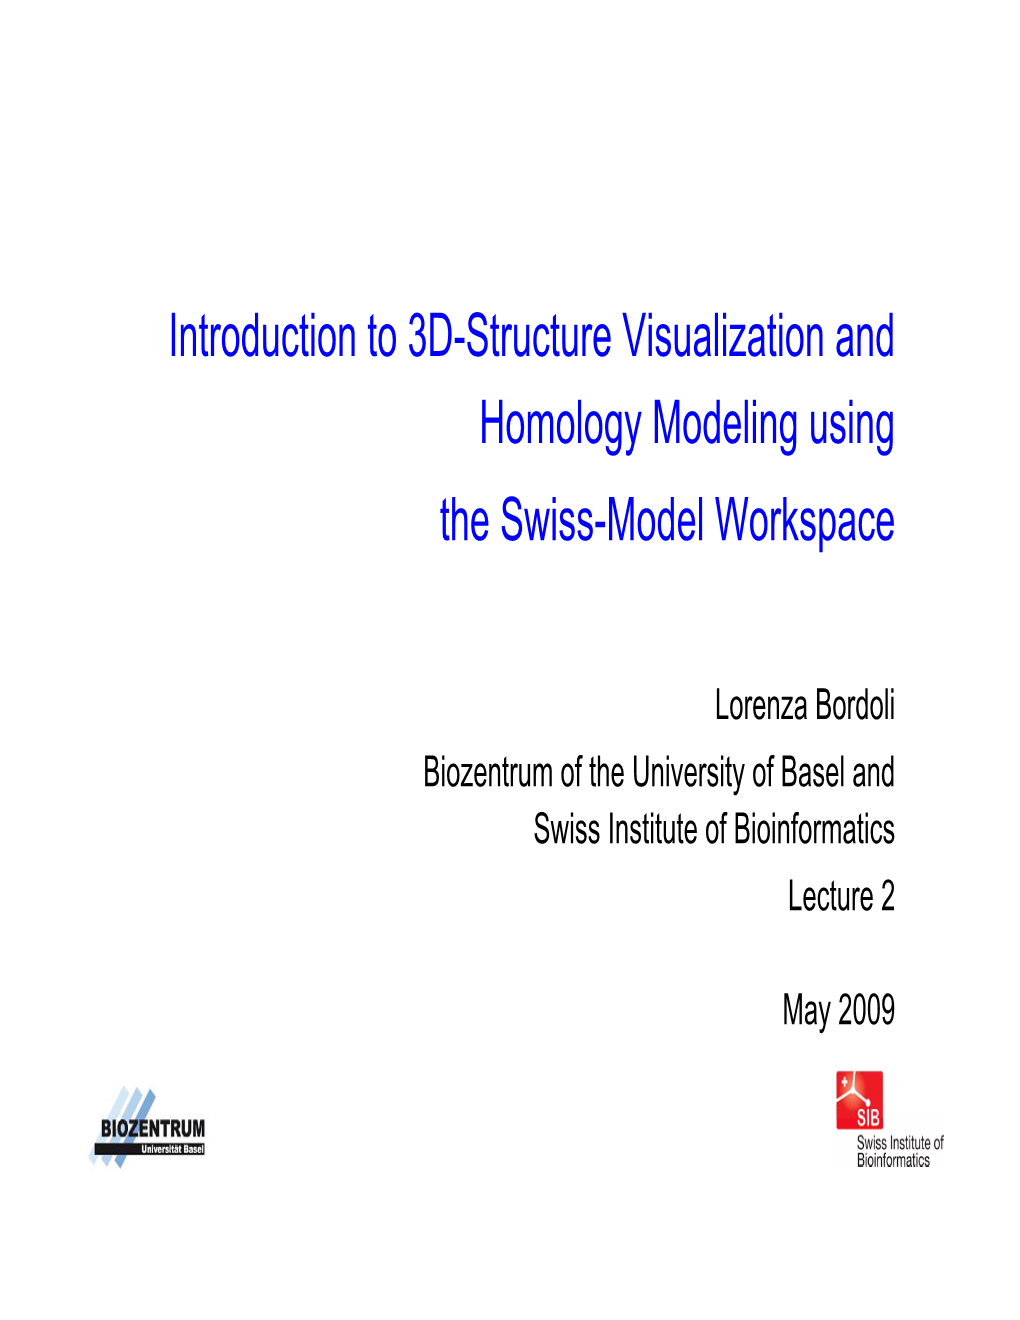 Introduction to 3D-Structure Visualization and Homology Modeling Using the Swiss-Model Workspace